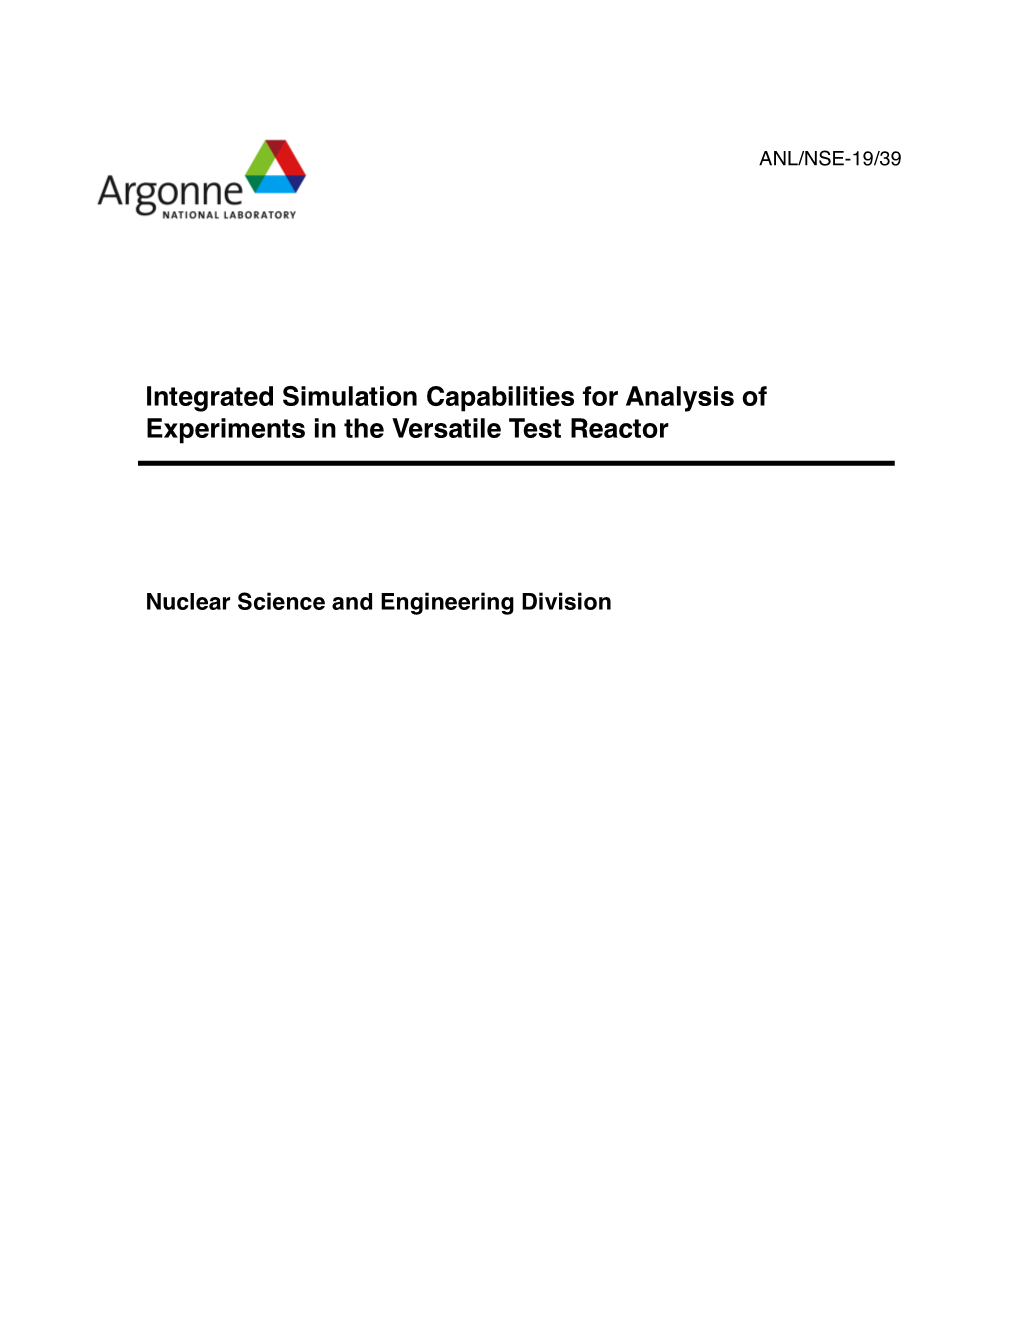 Integrated Simulation Capabilities for Analysis of Experiments in the Versatile Test Reactor